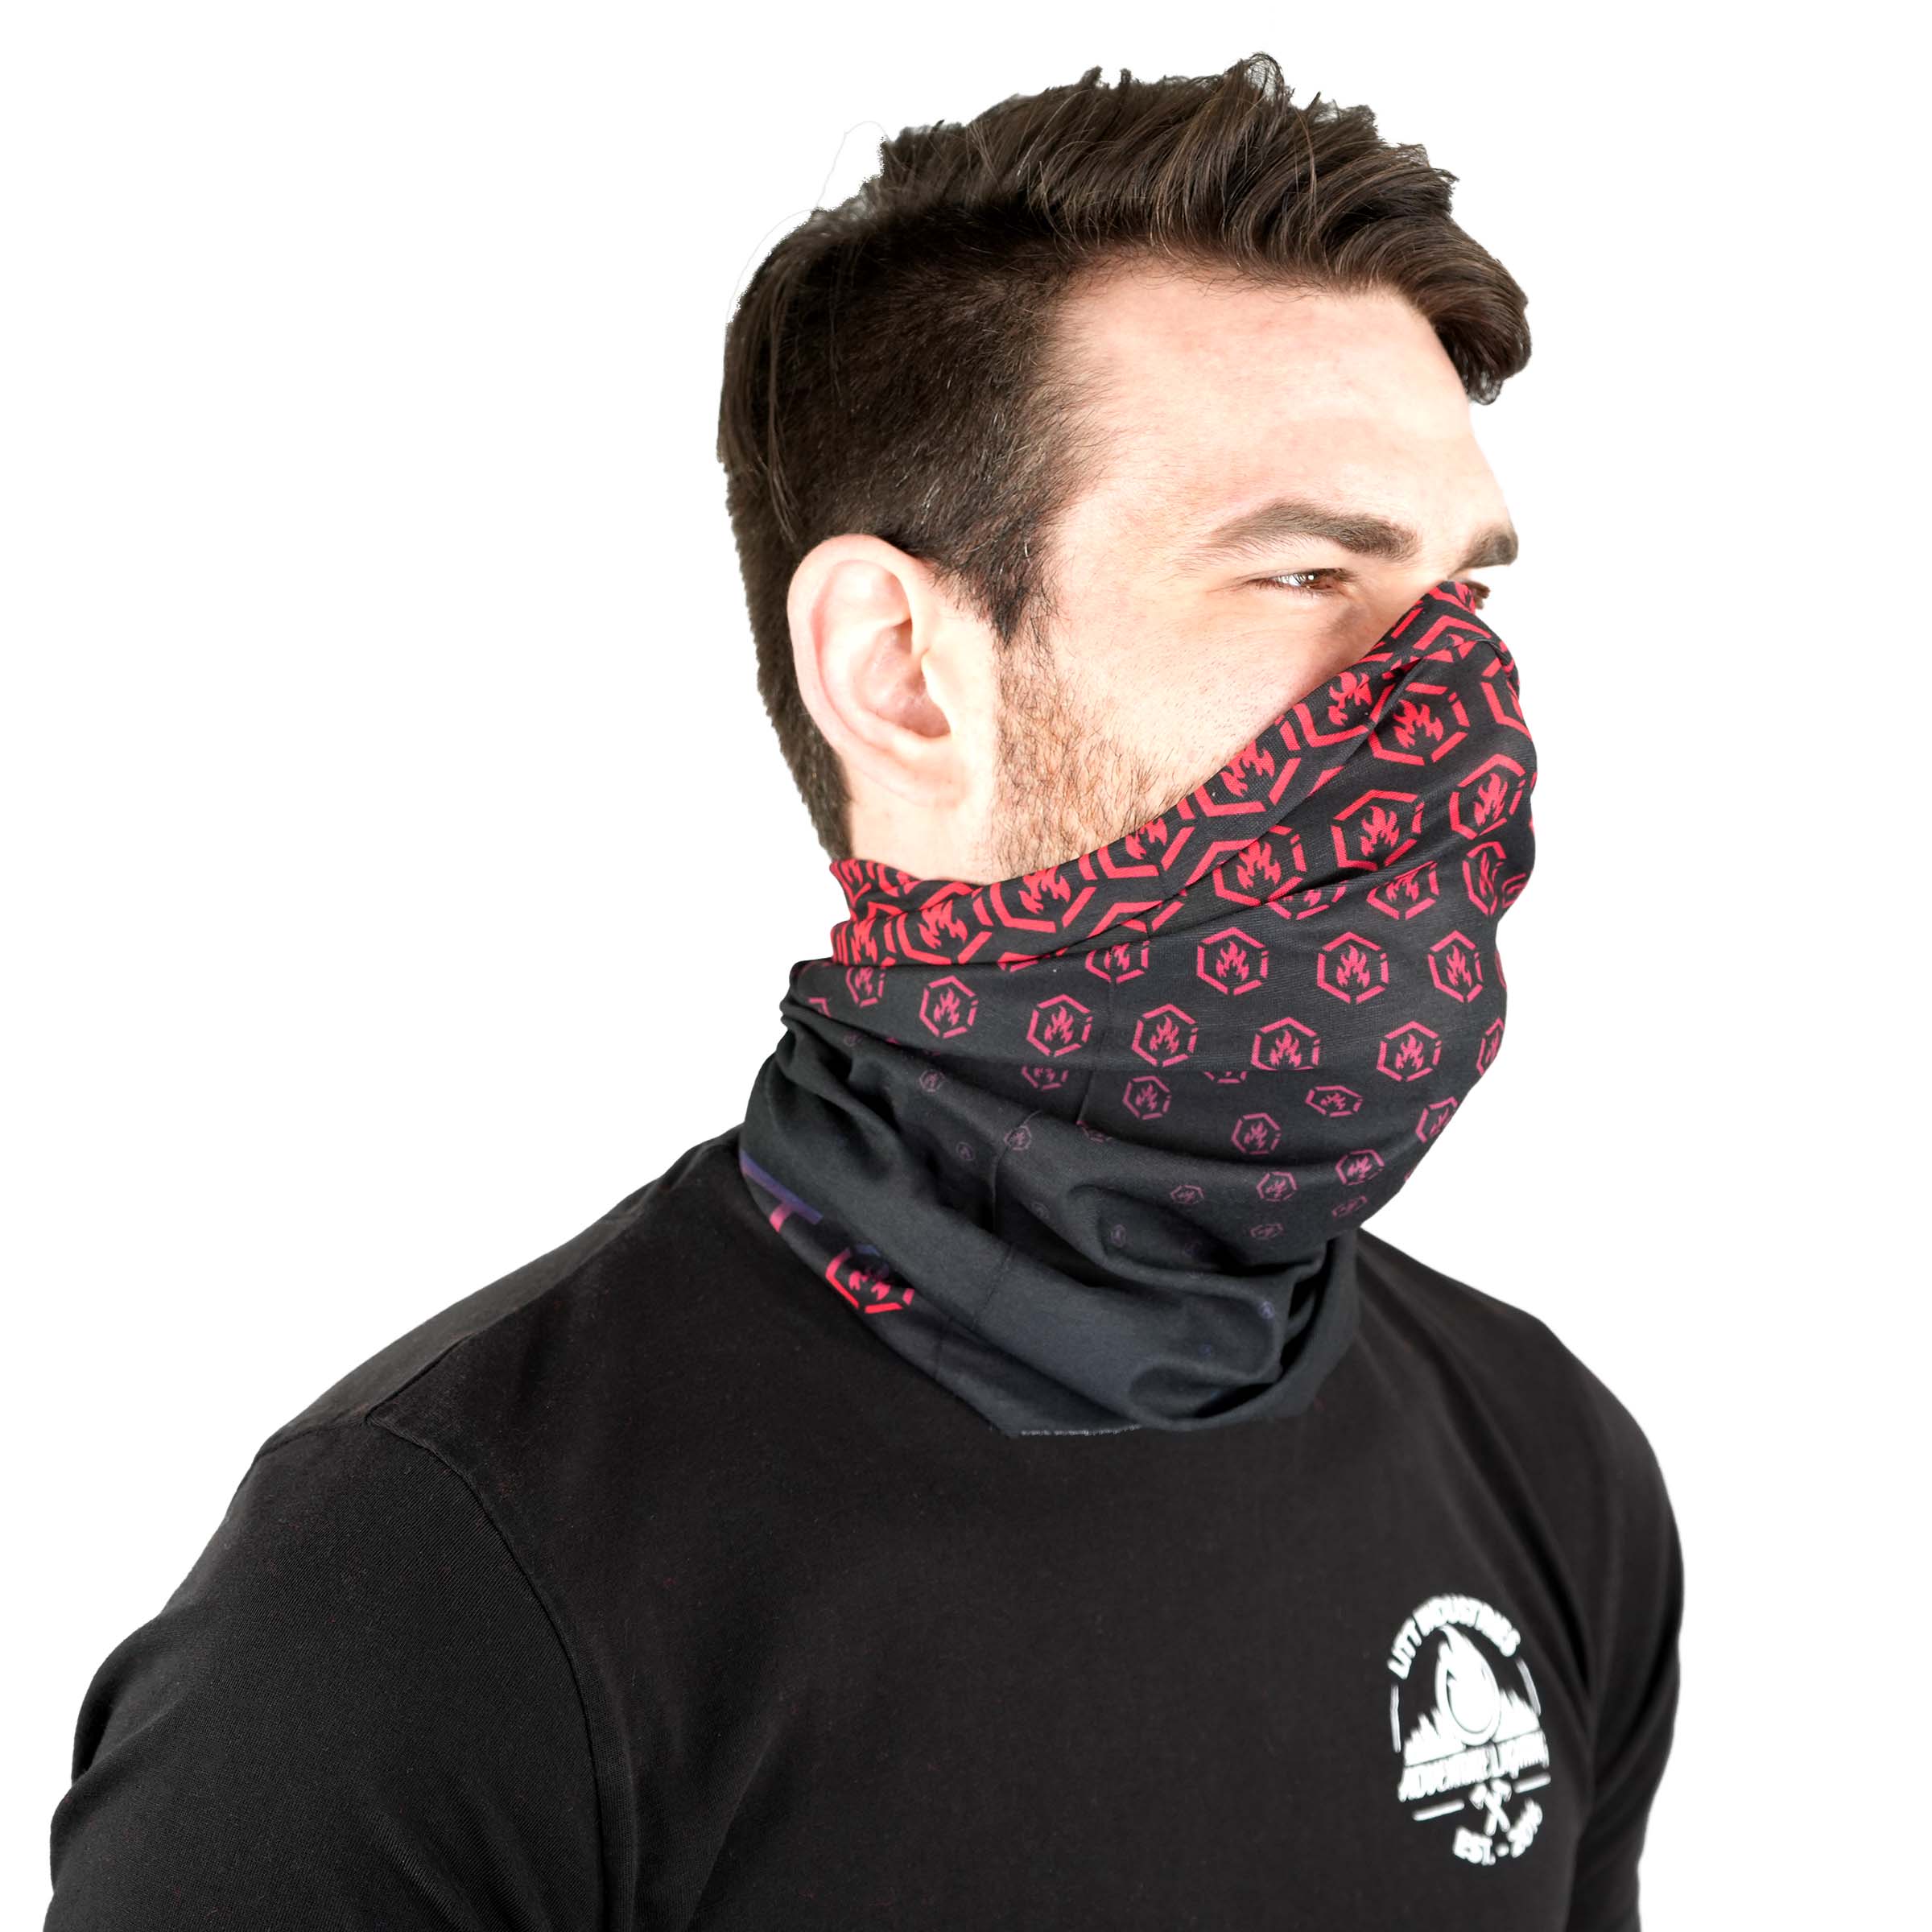 Litt Industries red hex neck gaiter for off roading keeps dust out of your nose and mouth